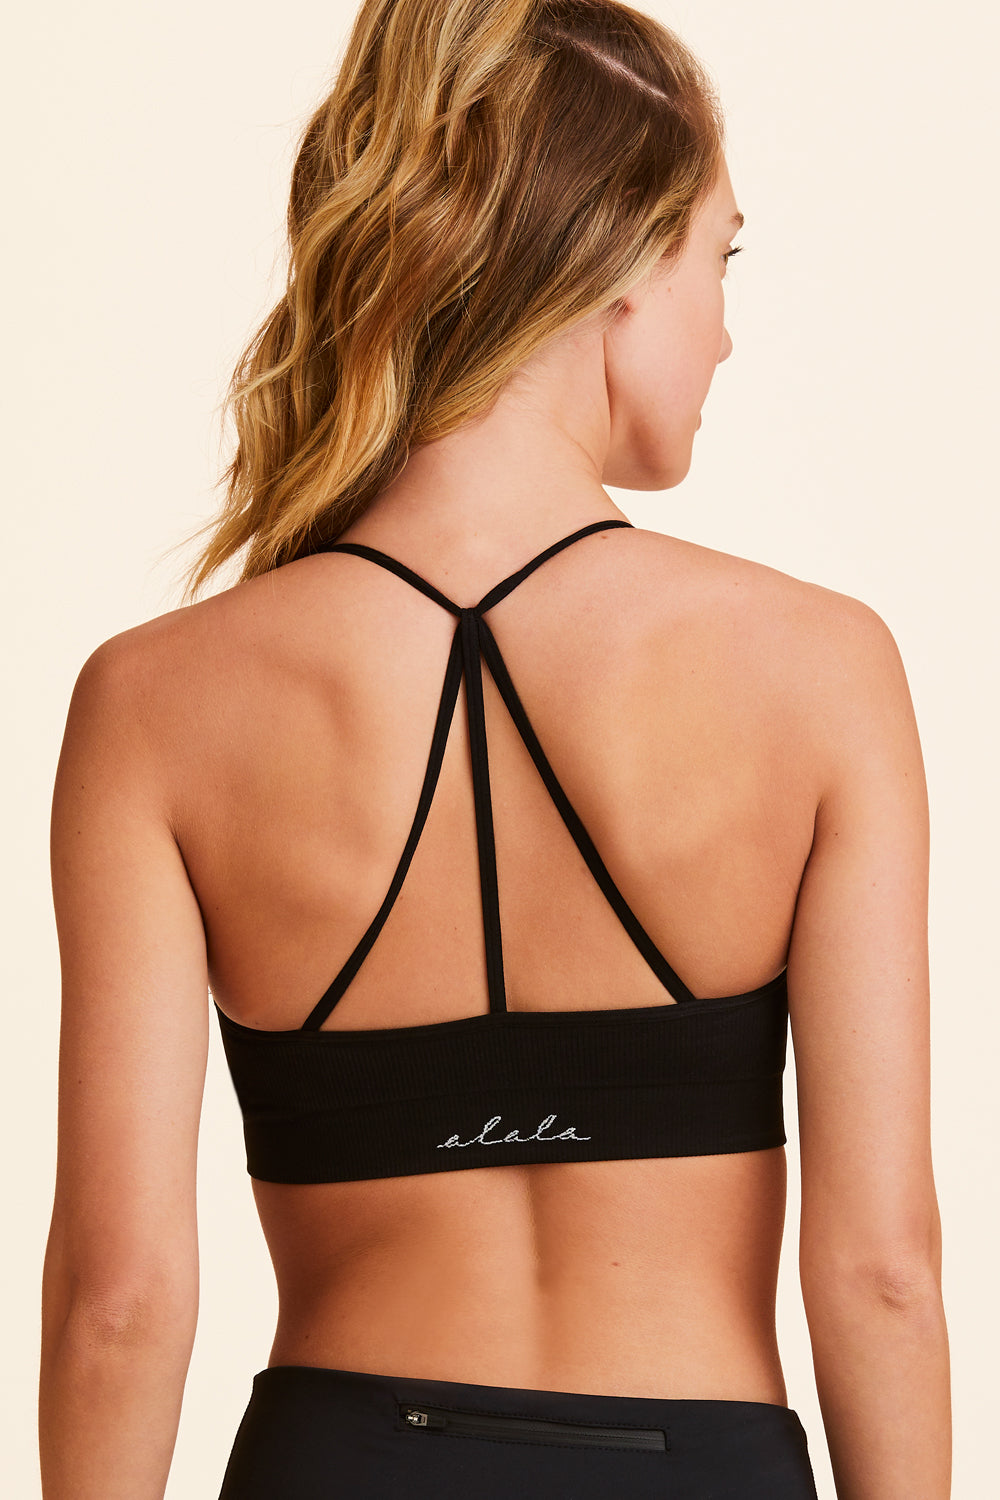 Back view of Alala Women's Luxury Athleisure black seamless bra with cross over back strap detailing